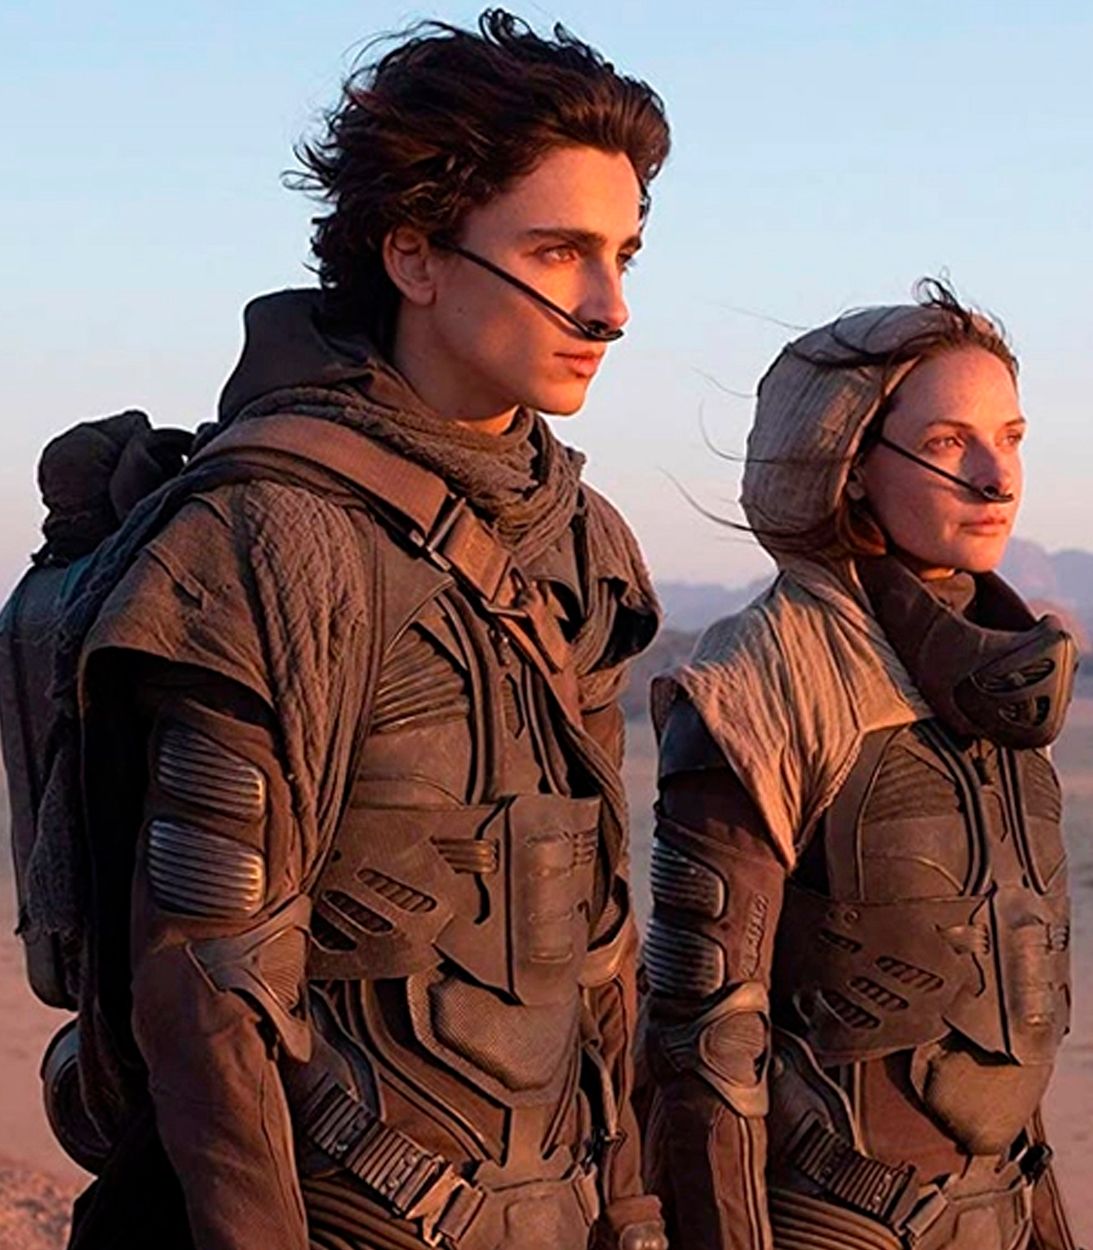 Timothee Chalamet as Paul Atreides faces the perils of the desert in Dune 2020